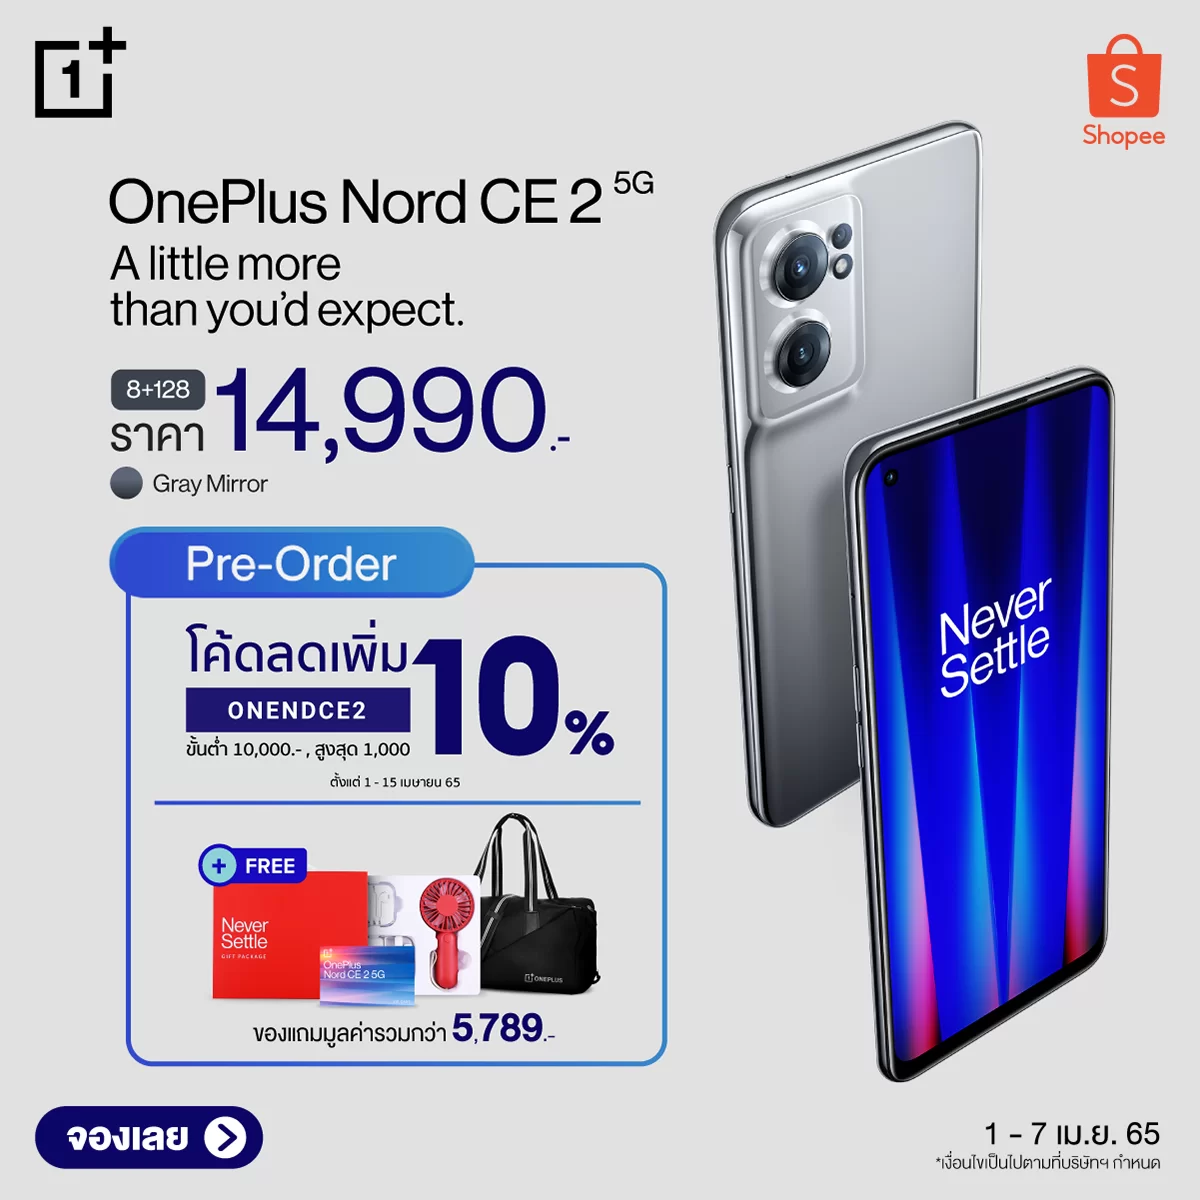 Ads-Feed-KV-OnePlus-Nord-CE-2-5G-Pre-Order-@Shopee